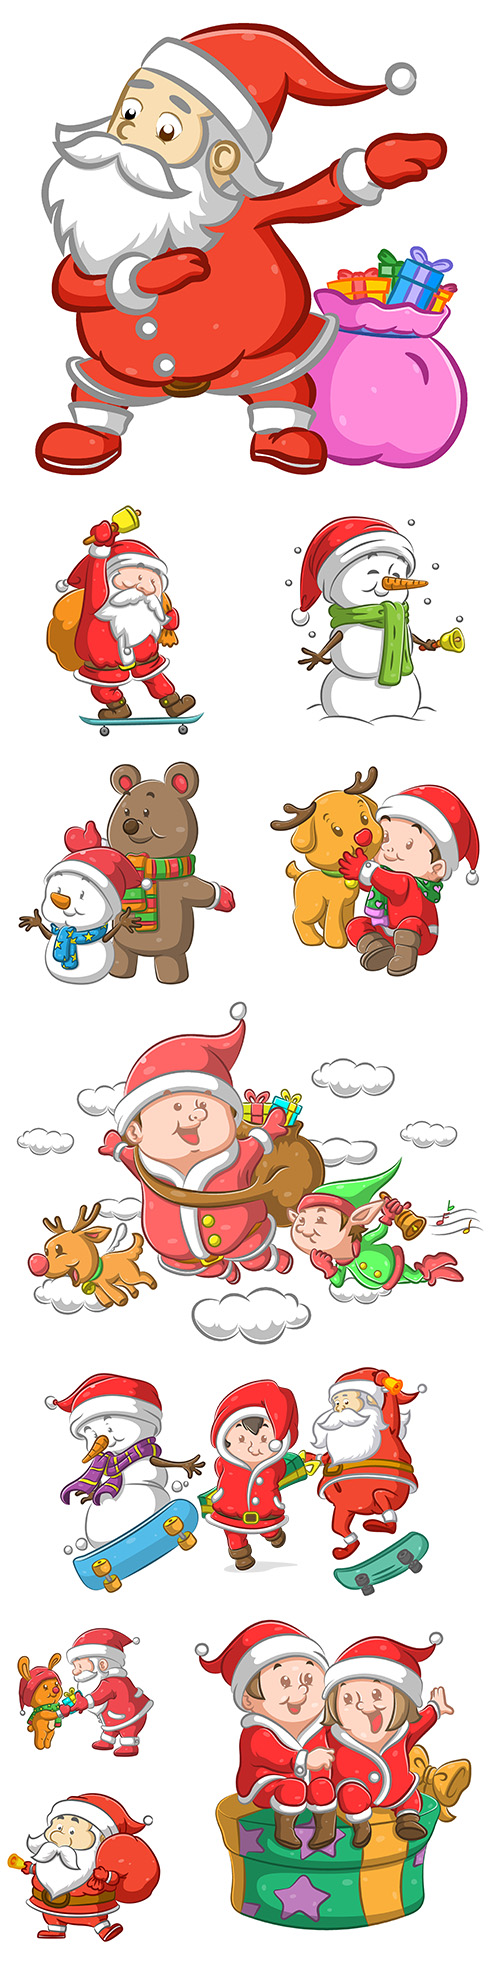 Santa Claus with bag of gifts and snowman with scarf
